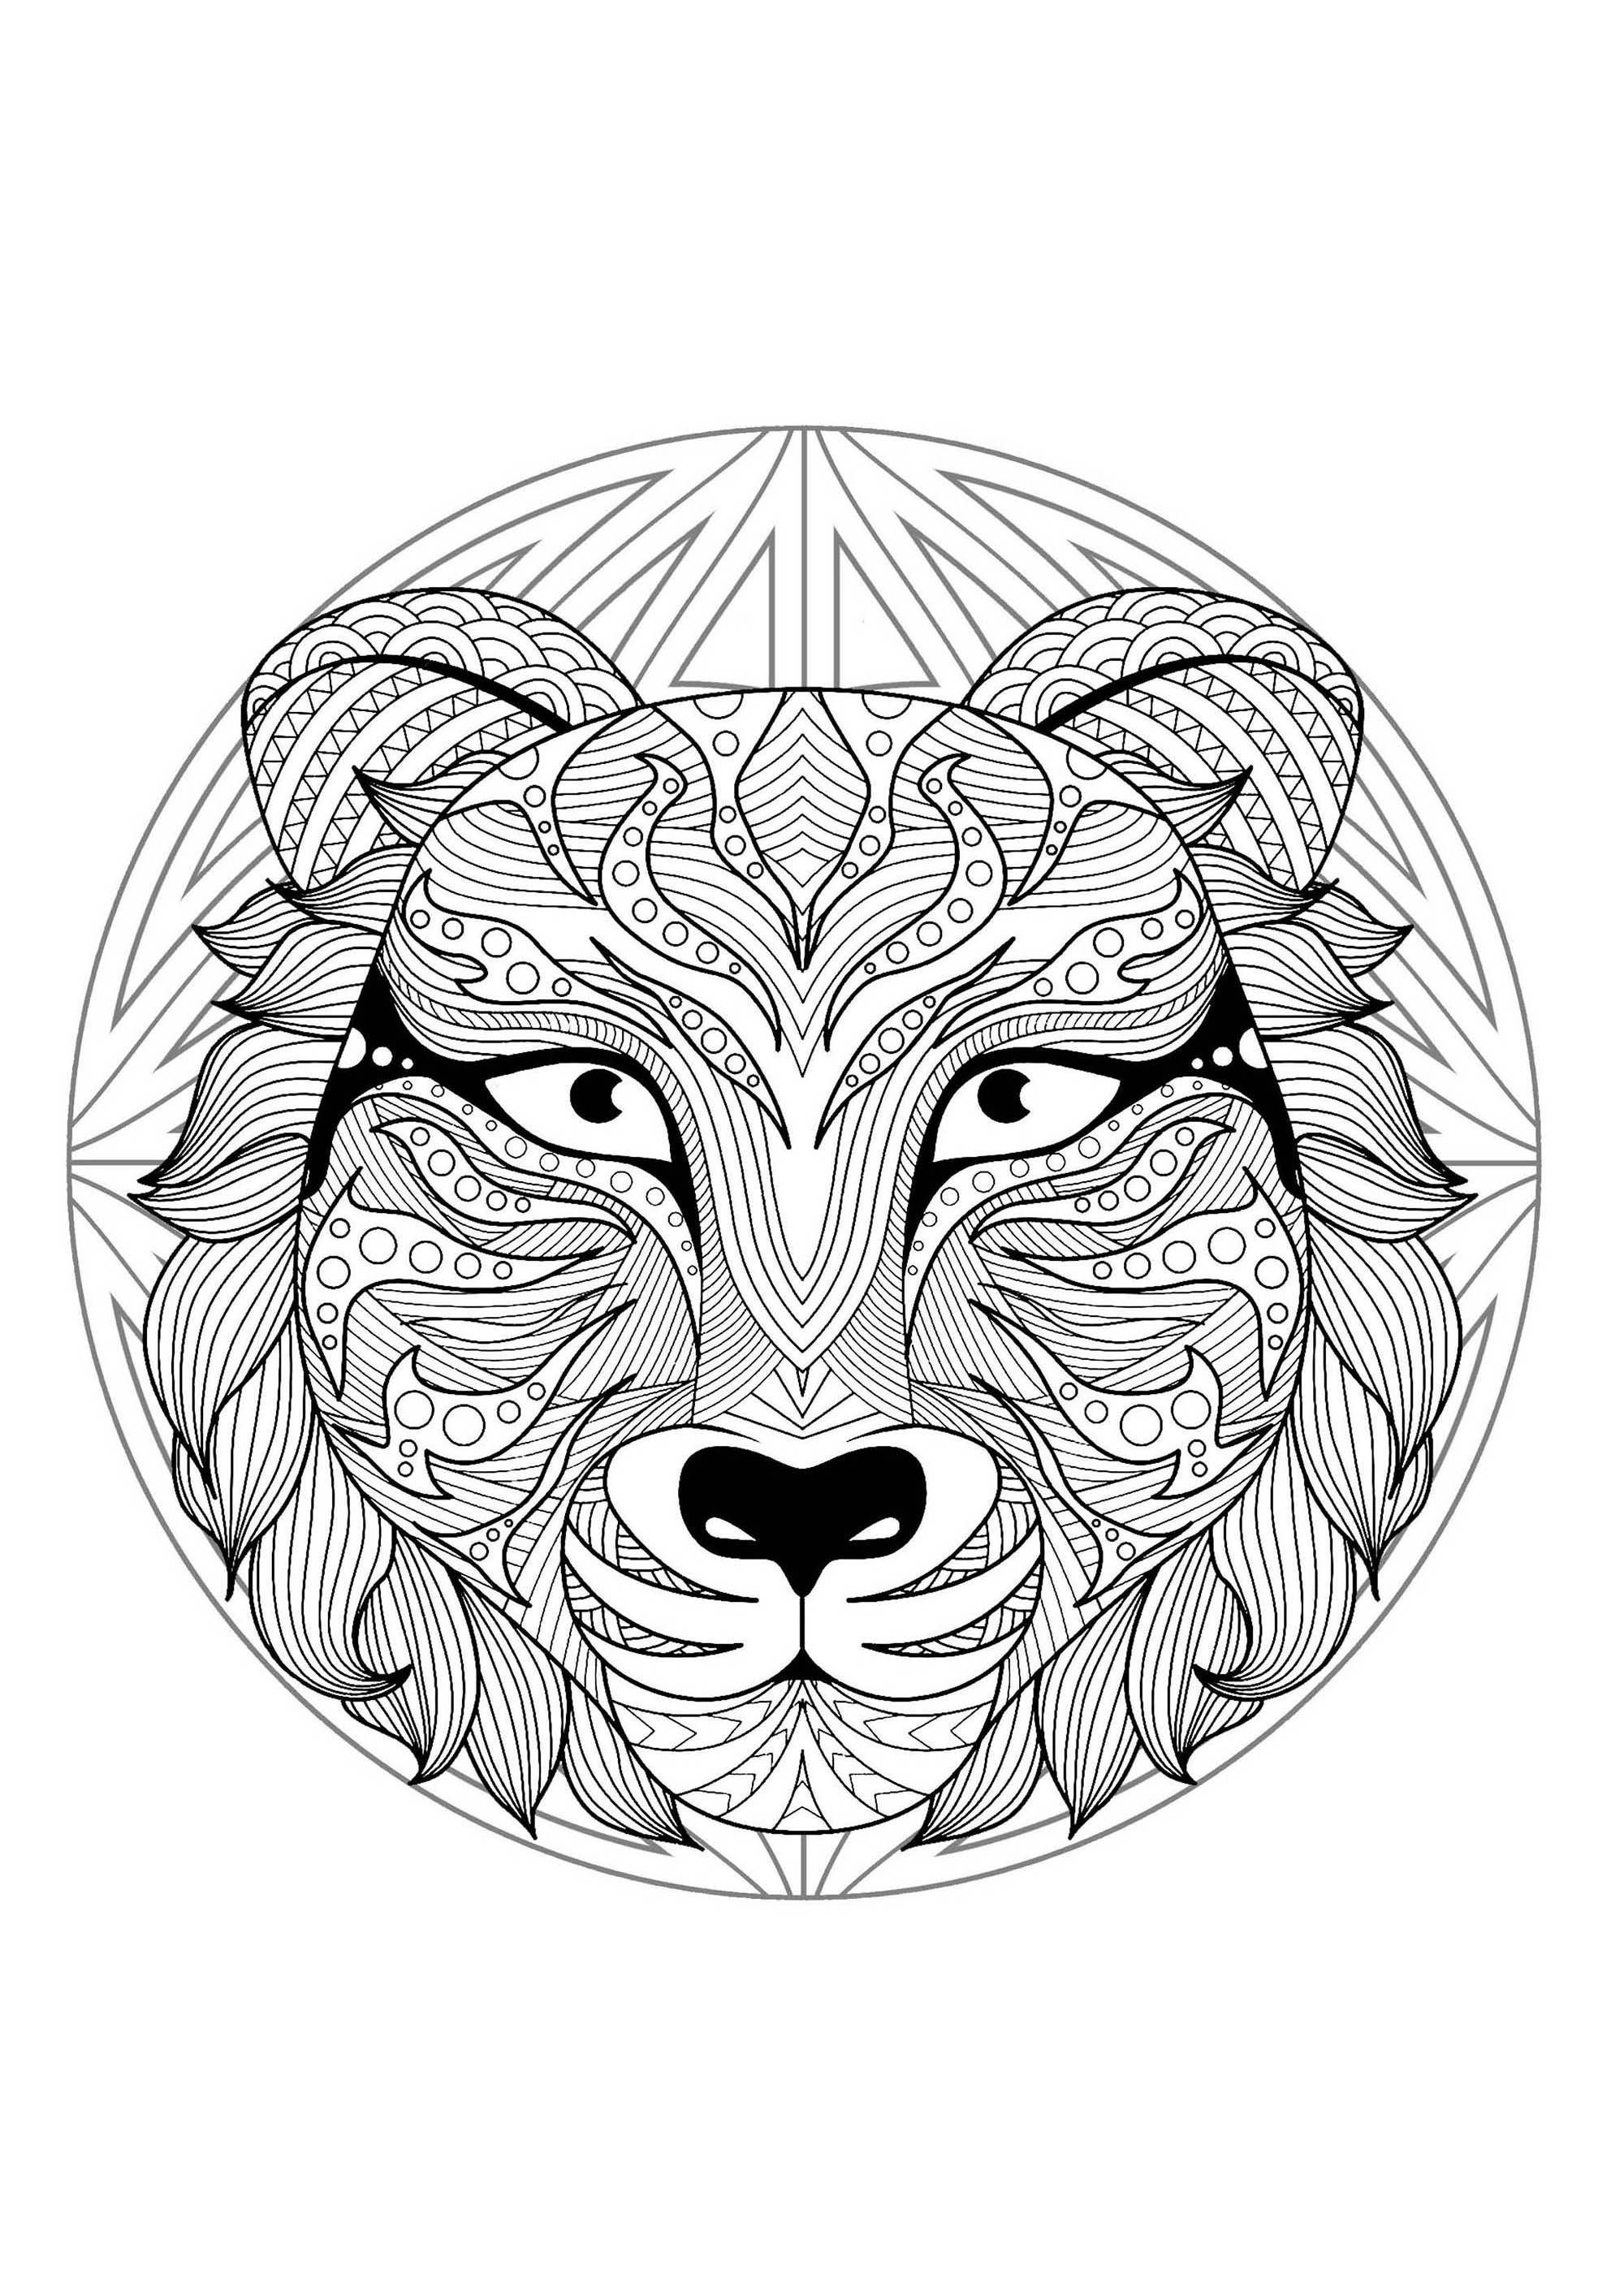 Tiger head in a difficult Mandala. A Mandala quite difficult to color, perfect if you like to color small areas, and if you like various details.